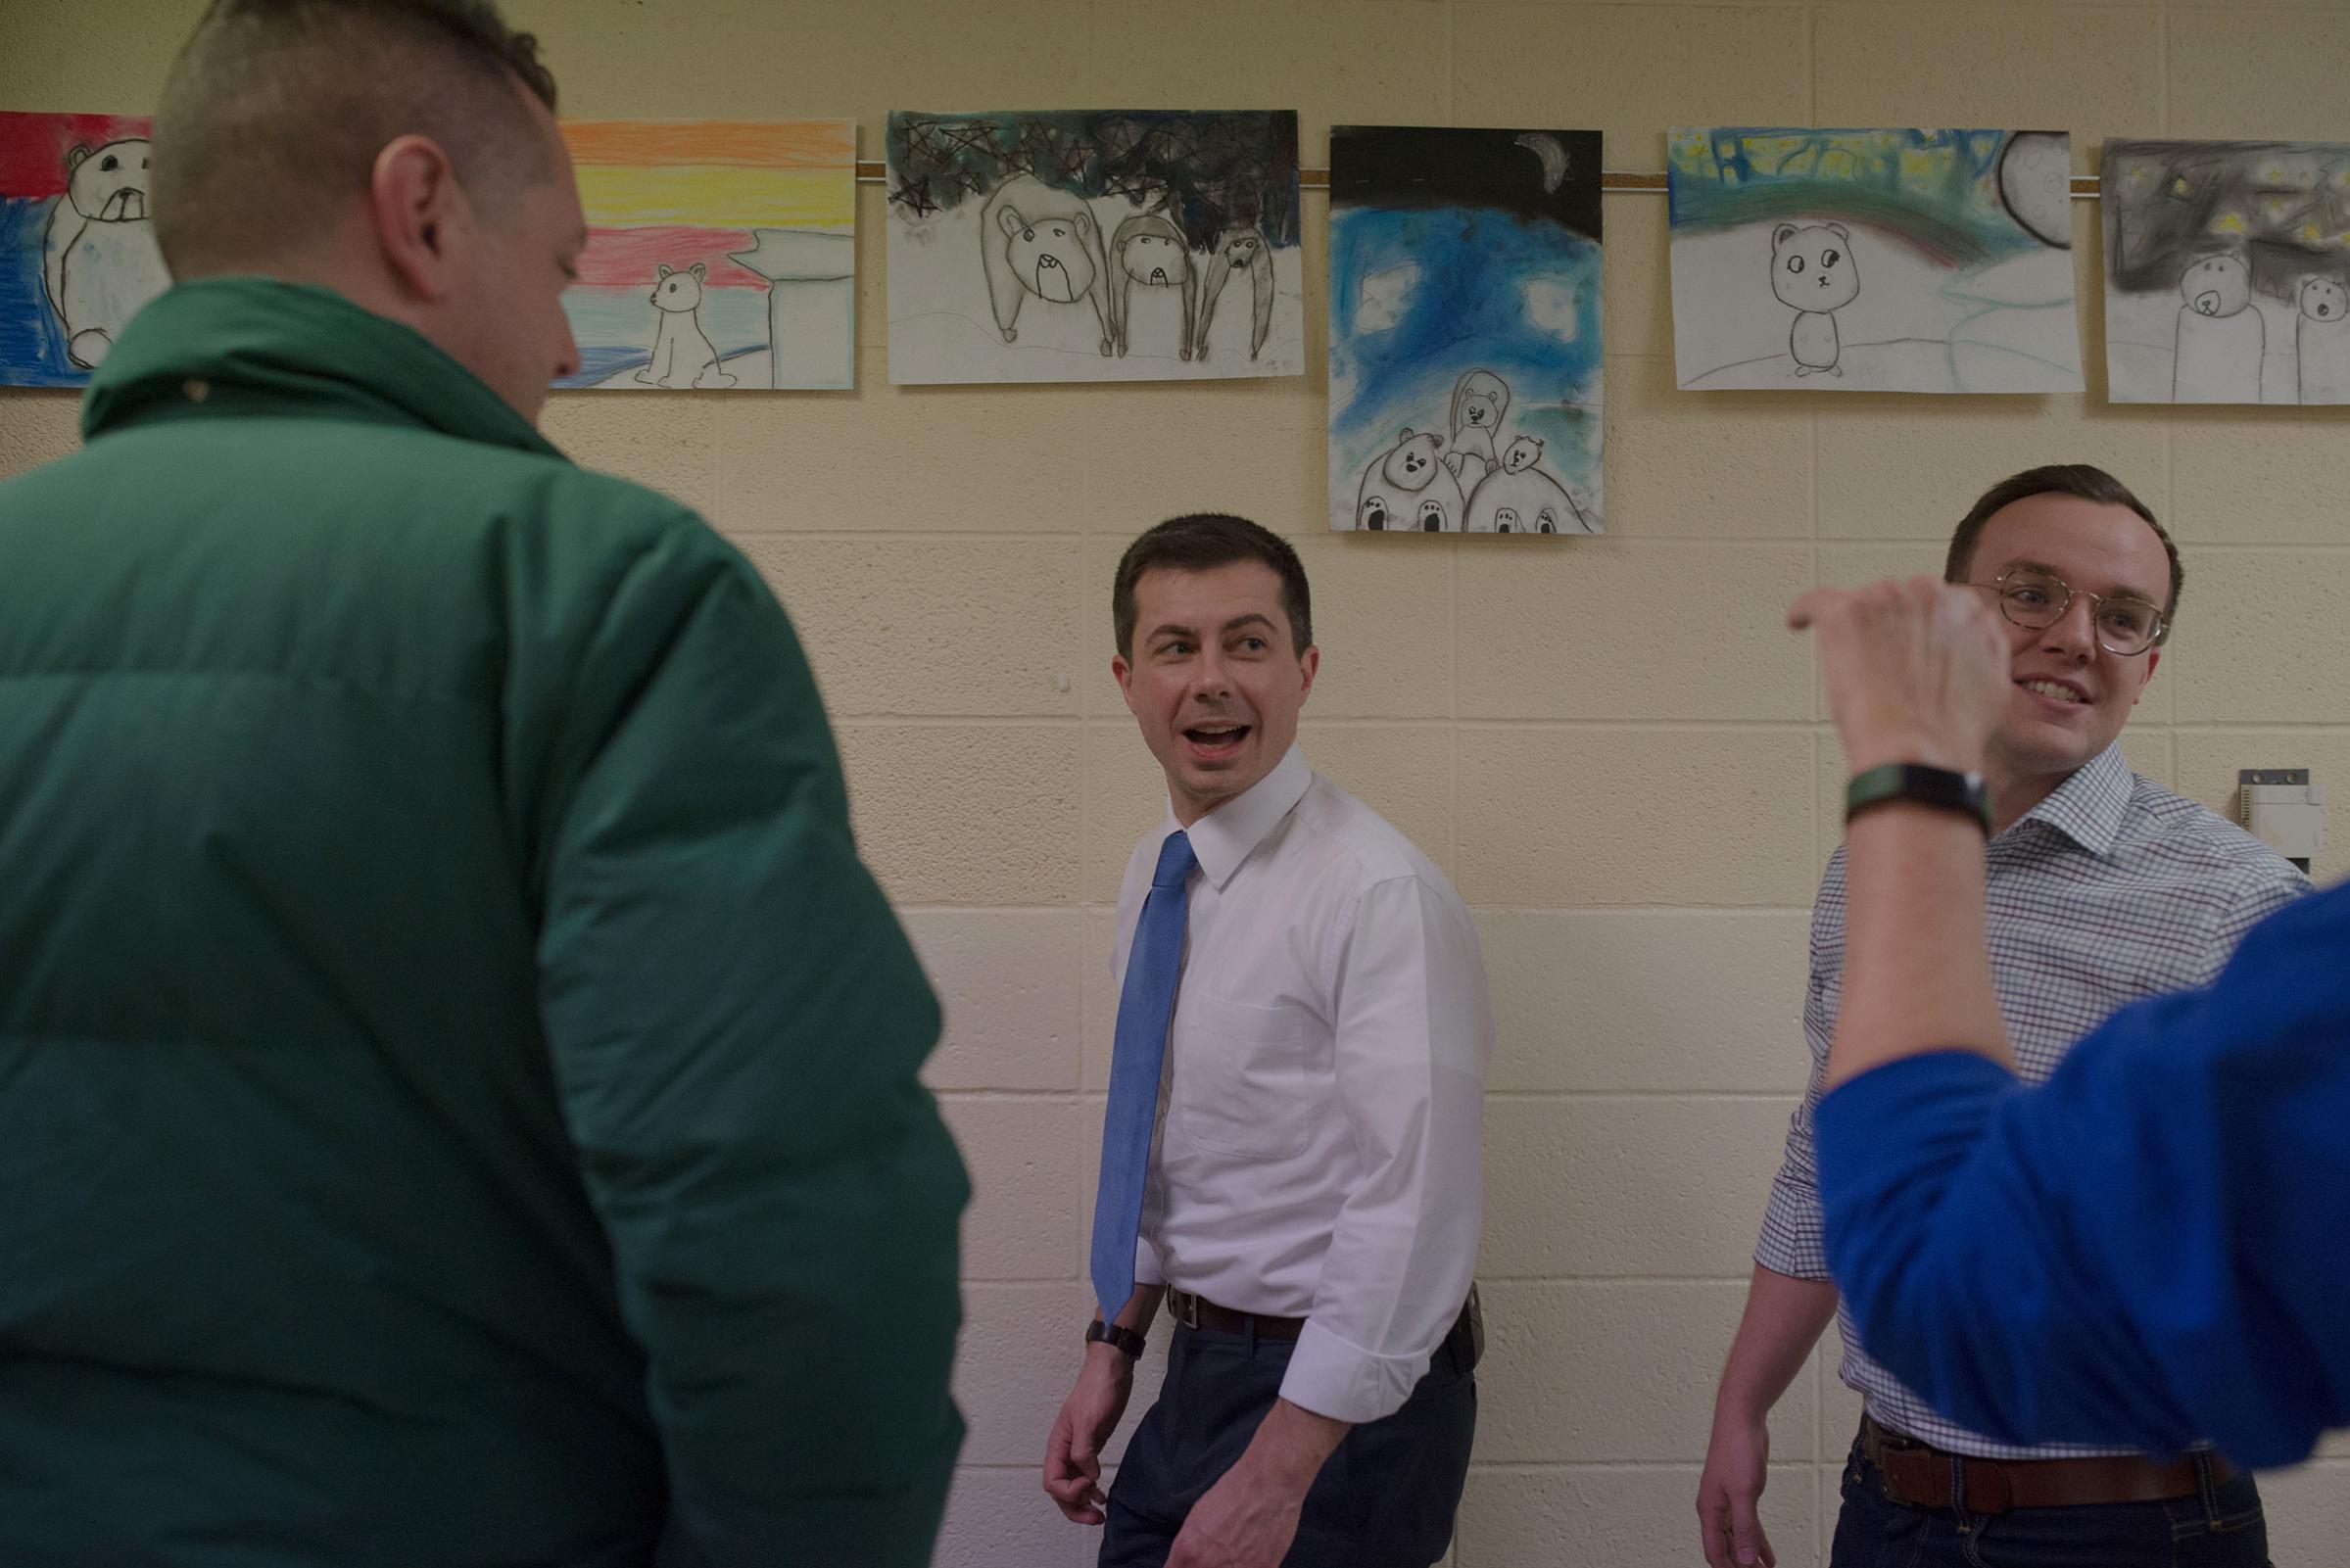 Pete Buttigieg at Town Hall in Vinton, IA on Jan. 27, 2020. Photo by September Dawn Bottoms for TIME.